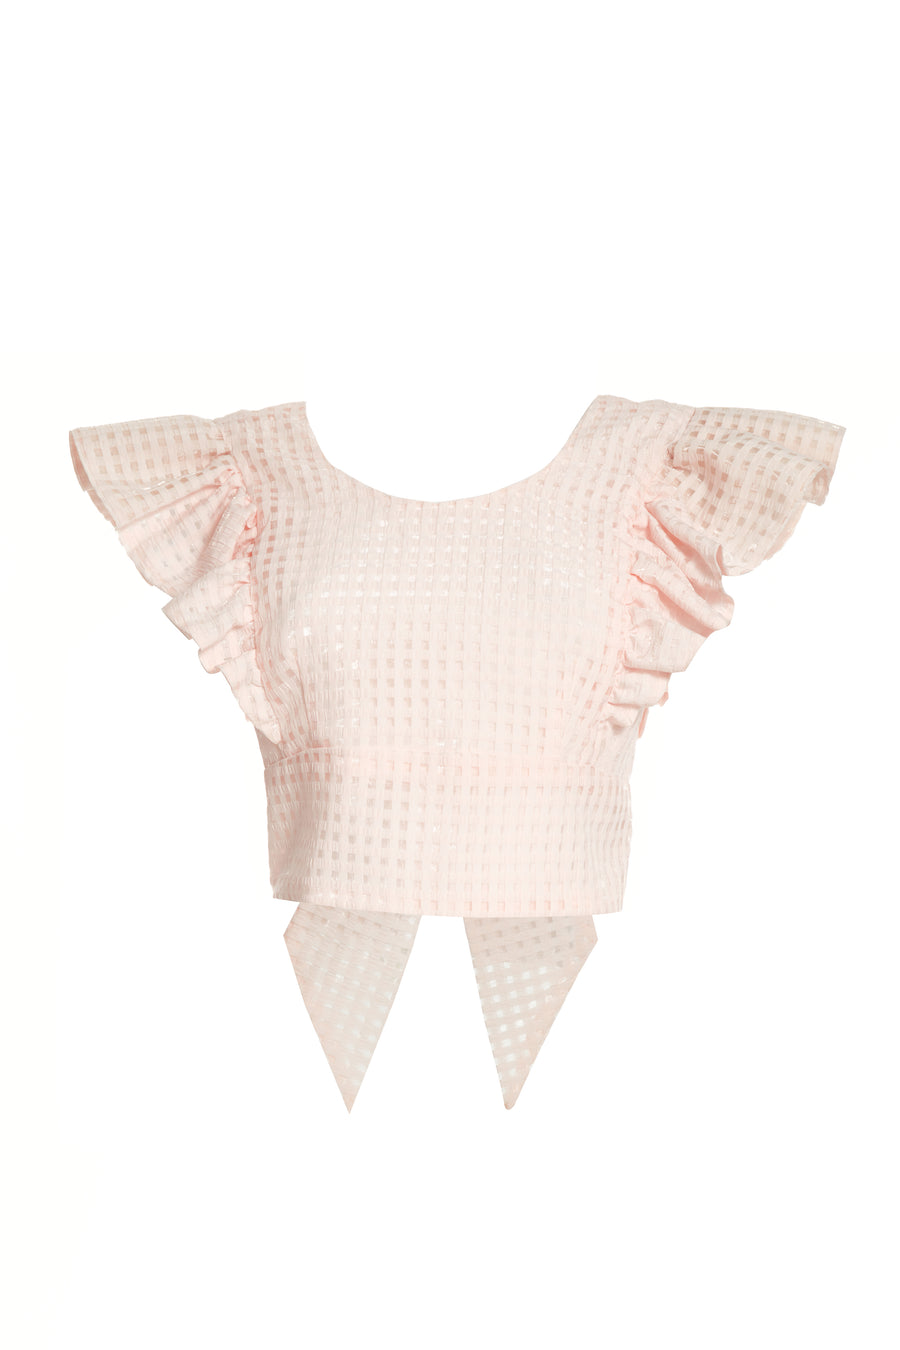 Quinoa Top Pink Dolby